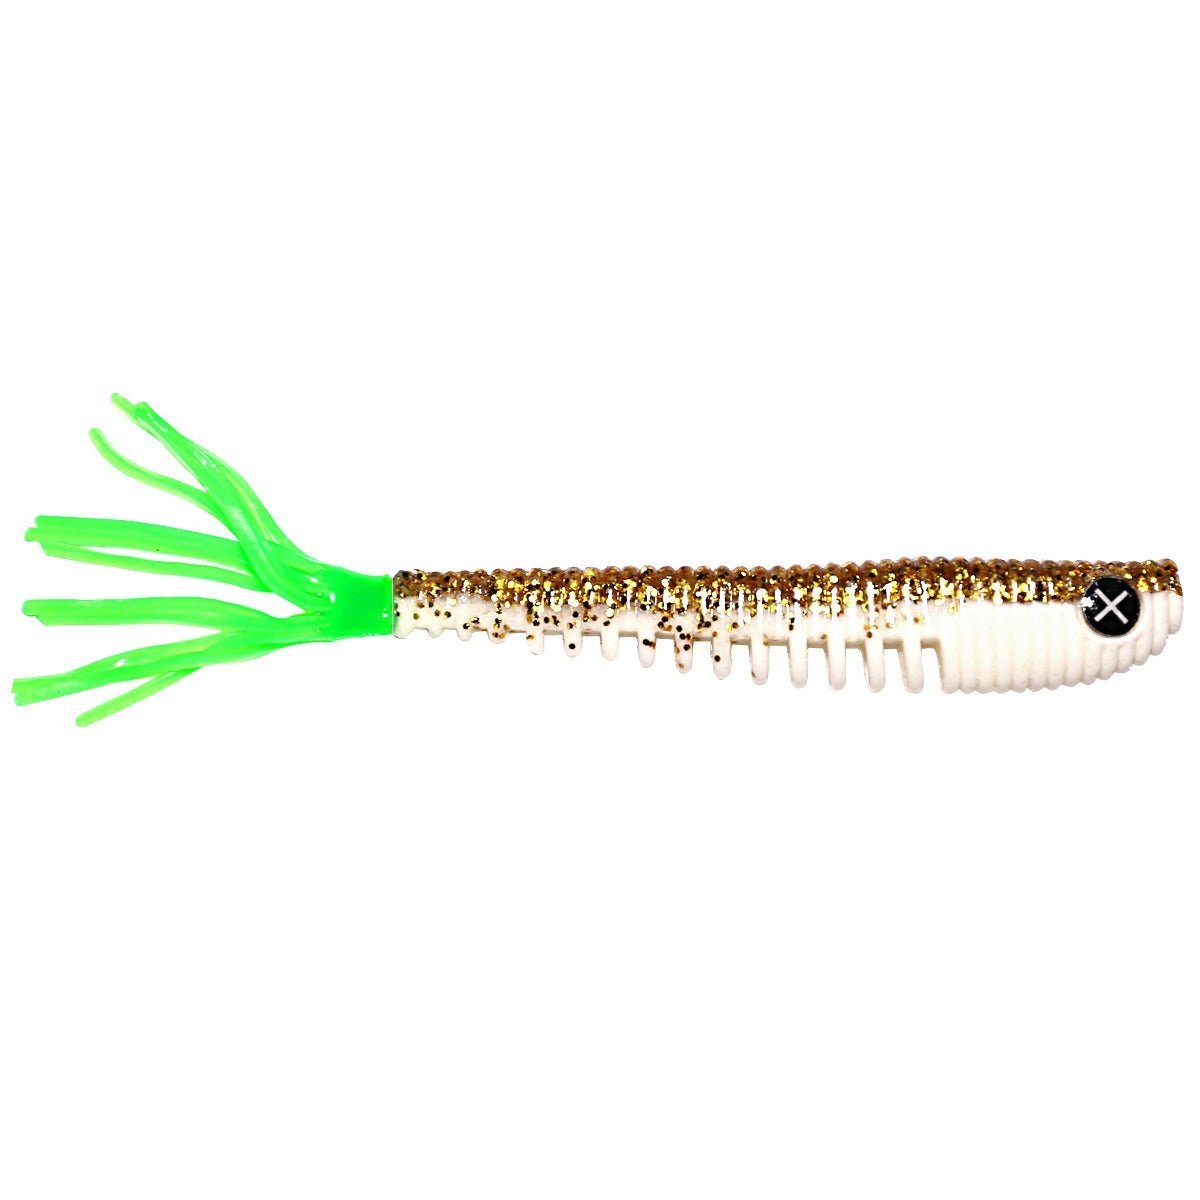 Lui 14cm Lures Kunstköder Big Monkey L Monkey Lures Gold by Rush Hairy